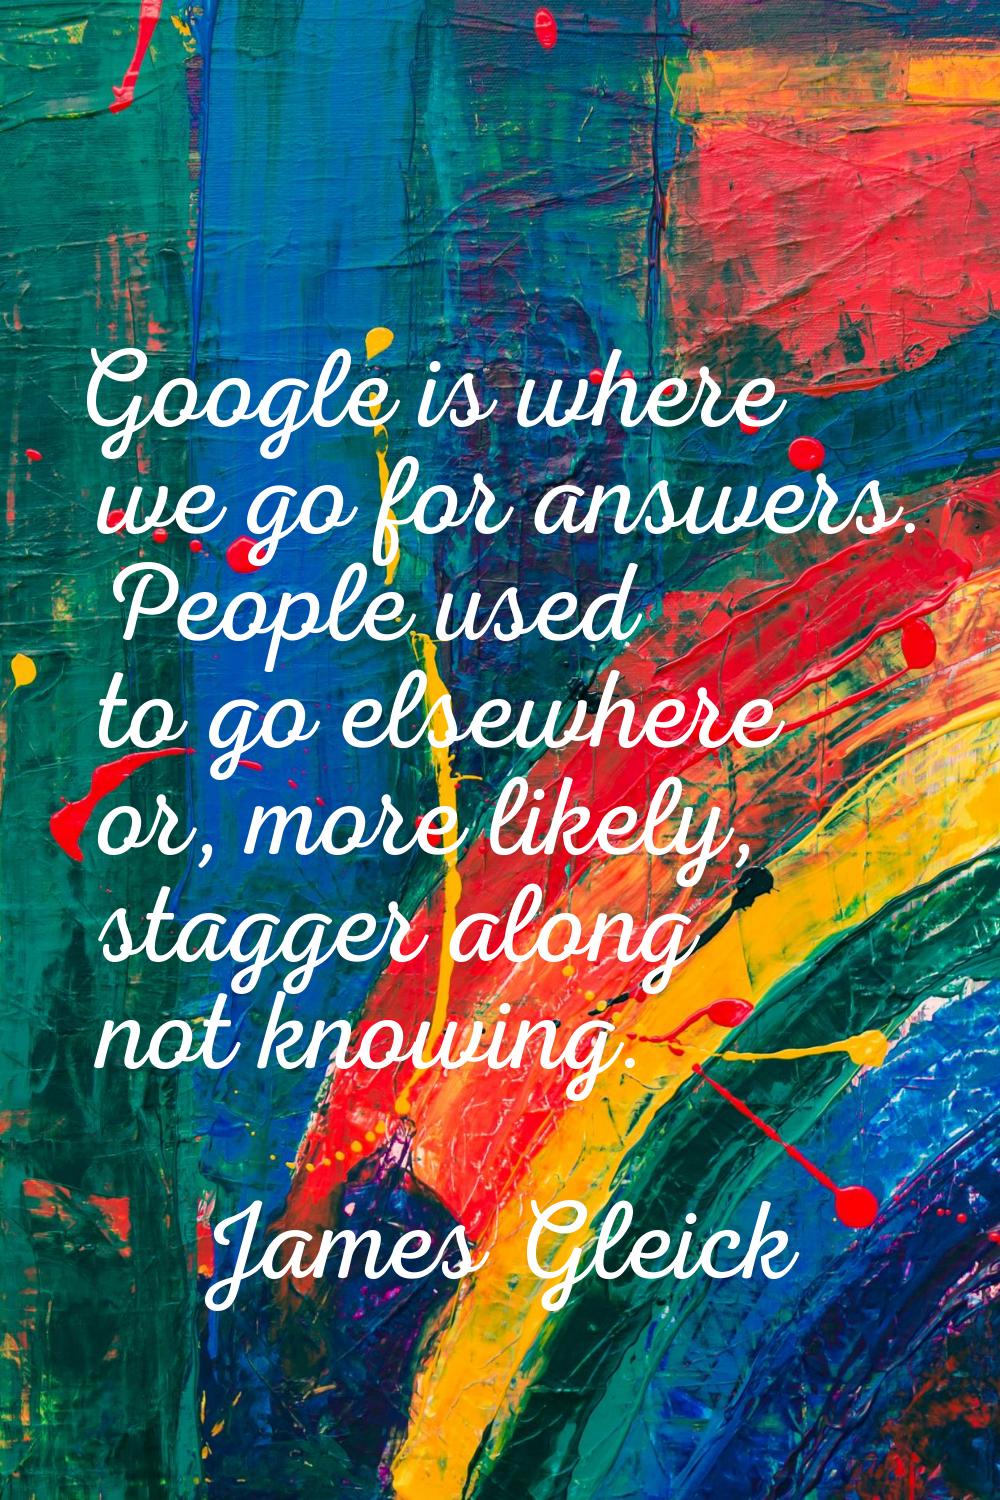 Google is where we go for answers. People used to go elsewhere or, more likely, stagger along not k